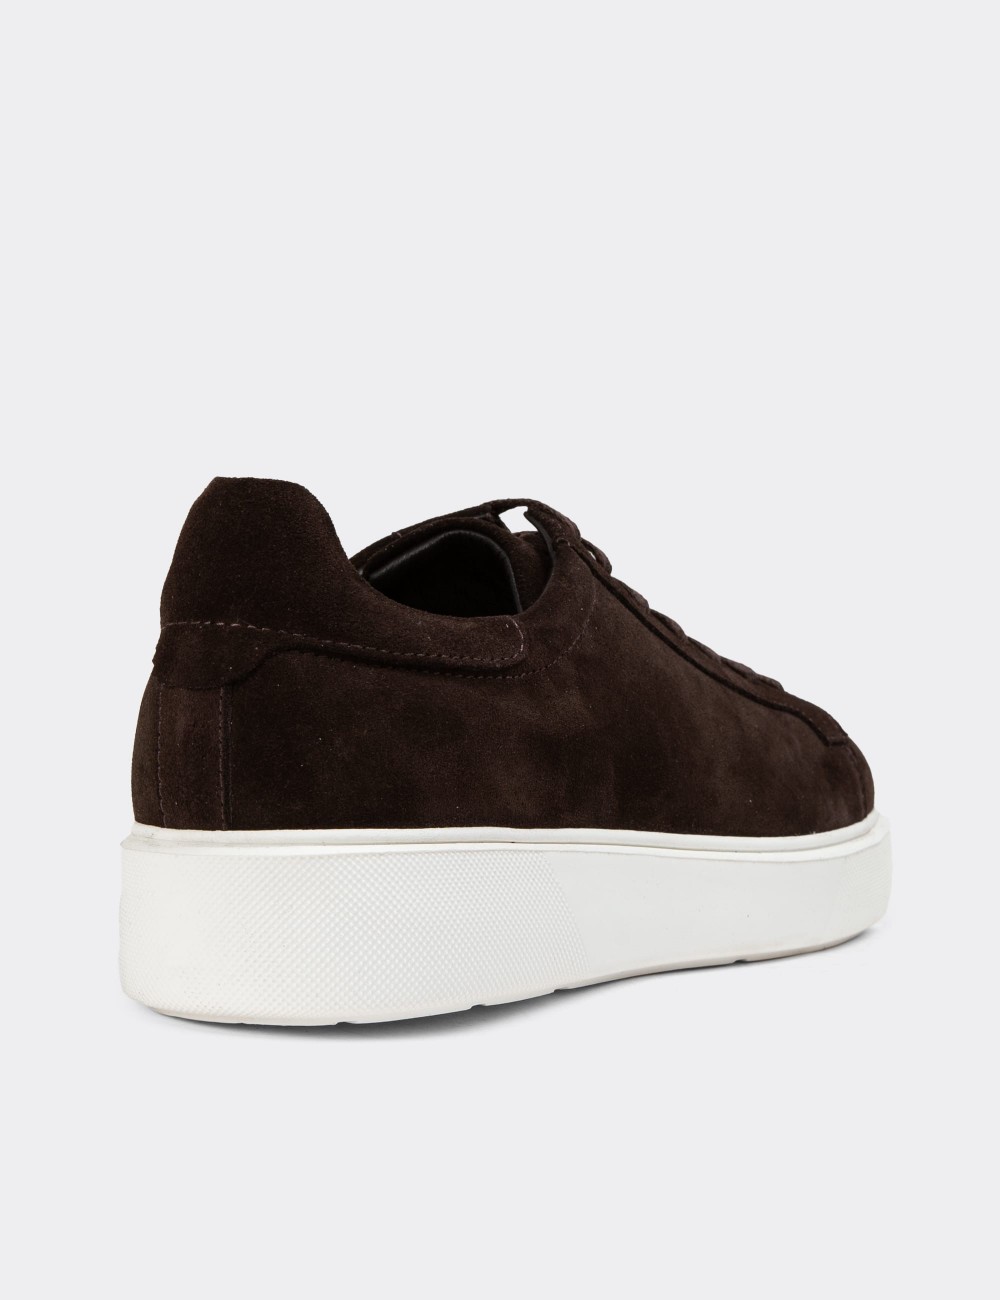 Brown Suede Leather Sneakers - 01954MKHVE01